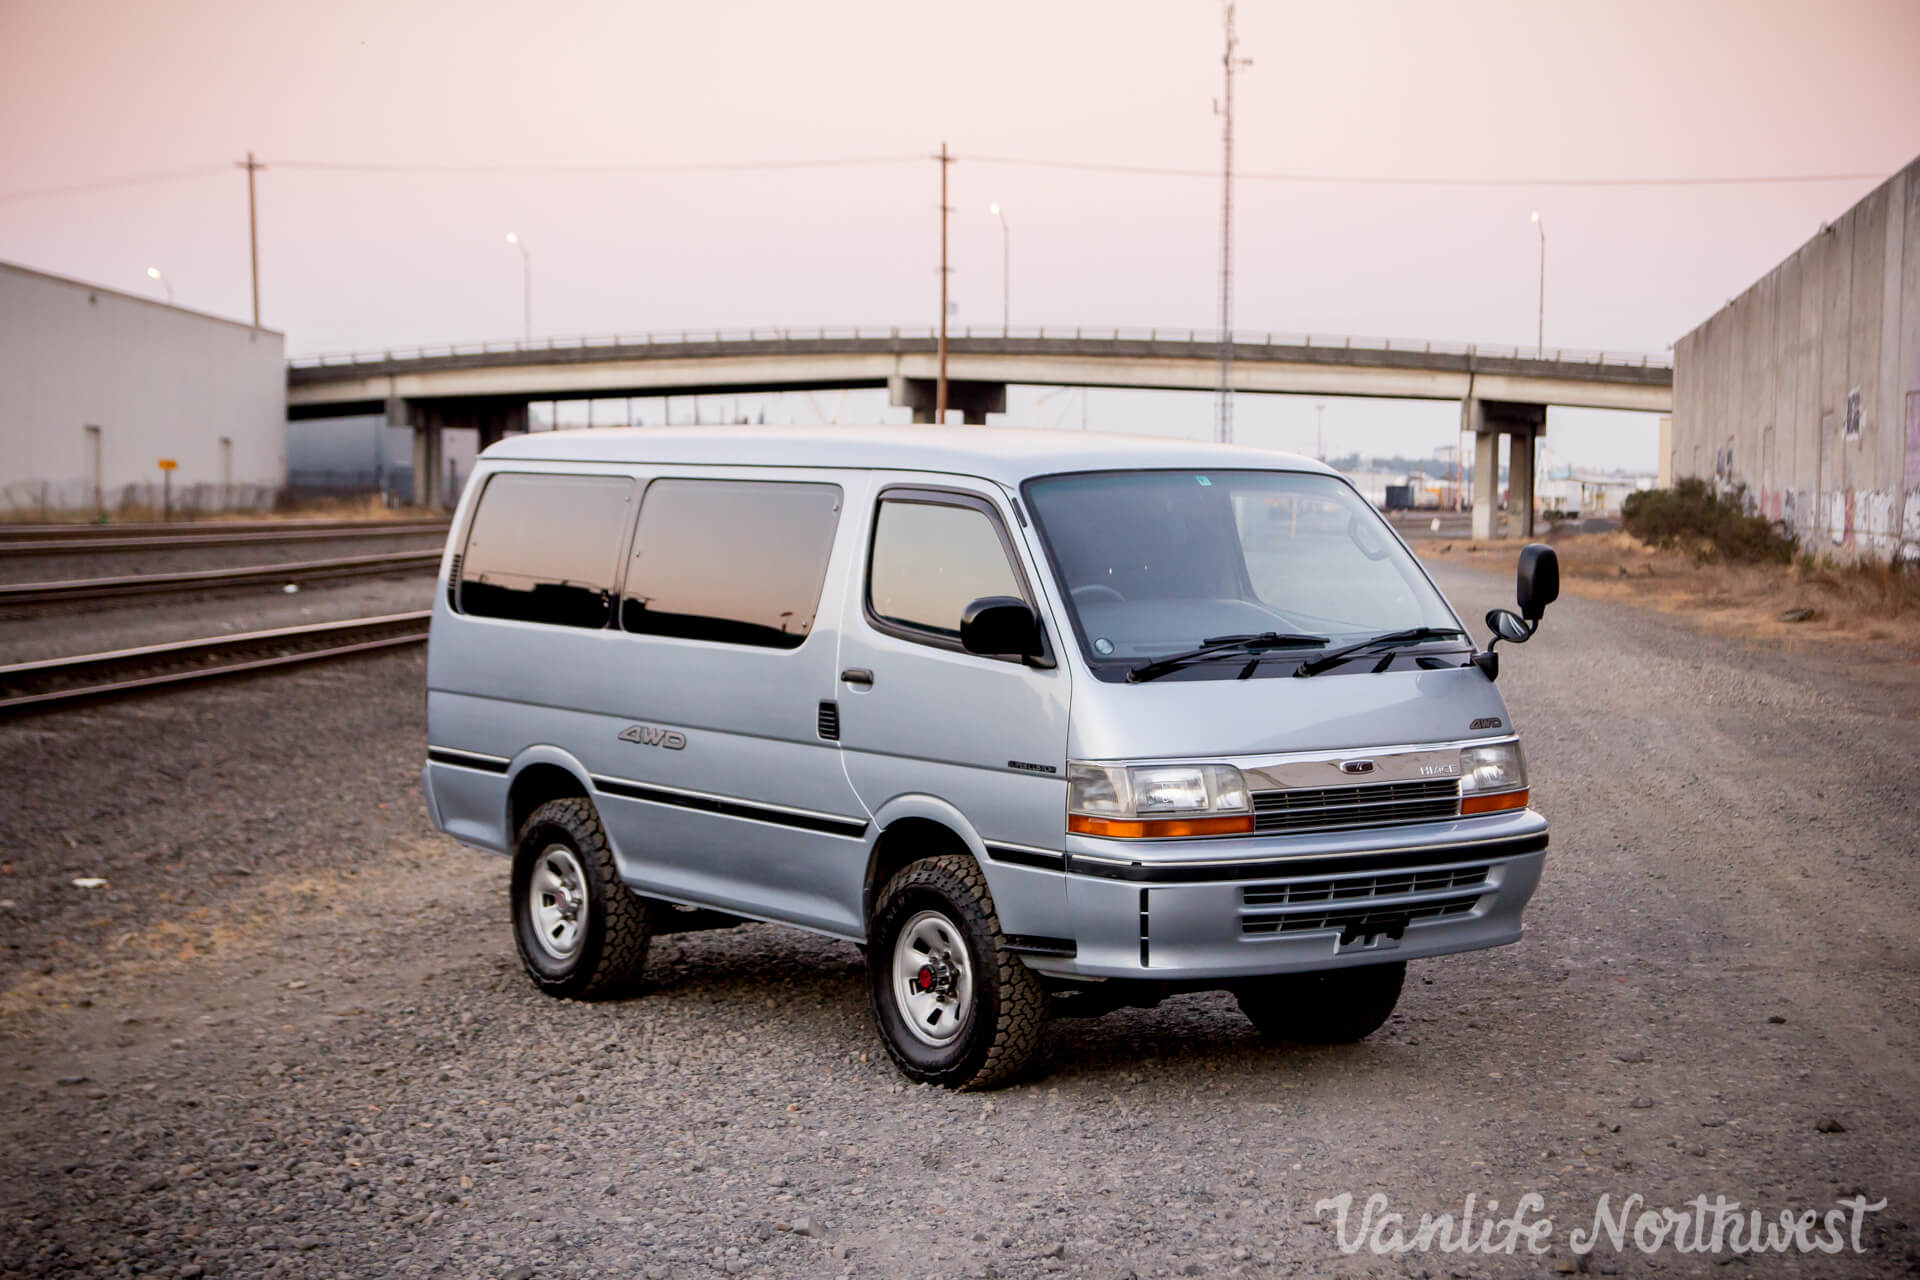 4wd hiace for sale